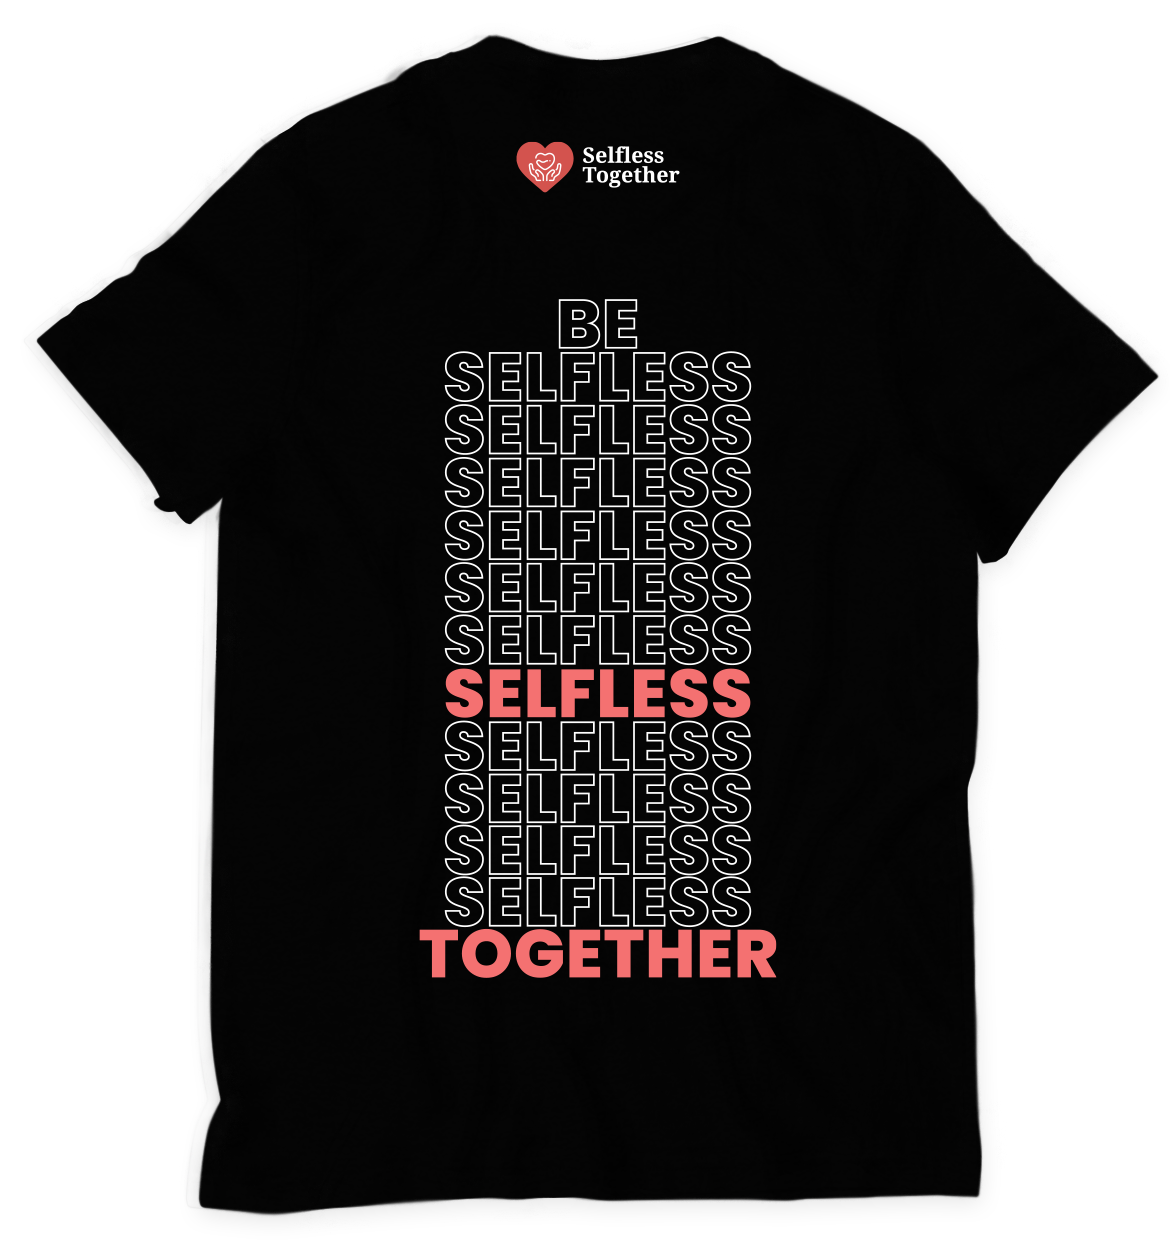 Let's be #SelflessTogether